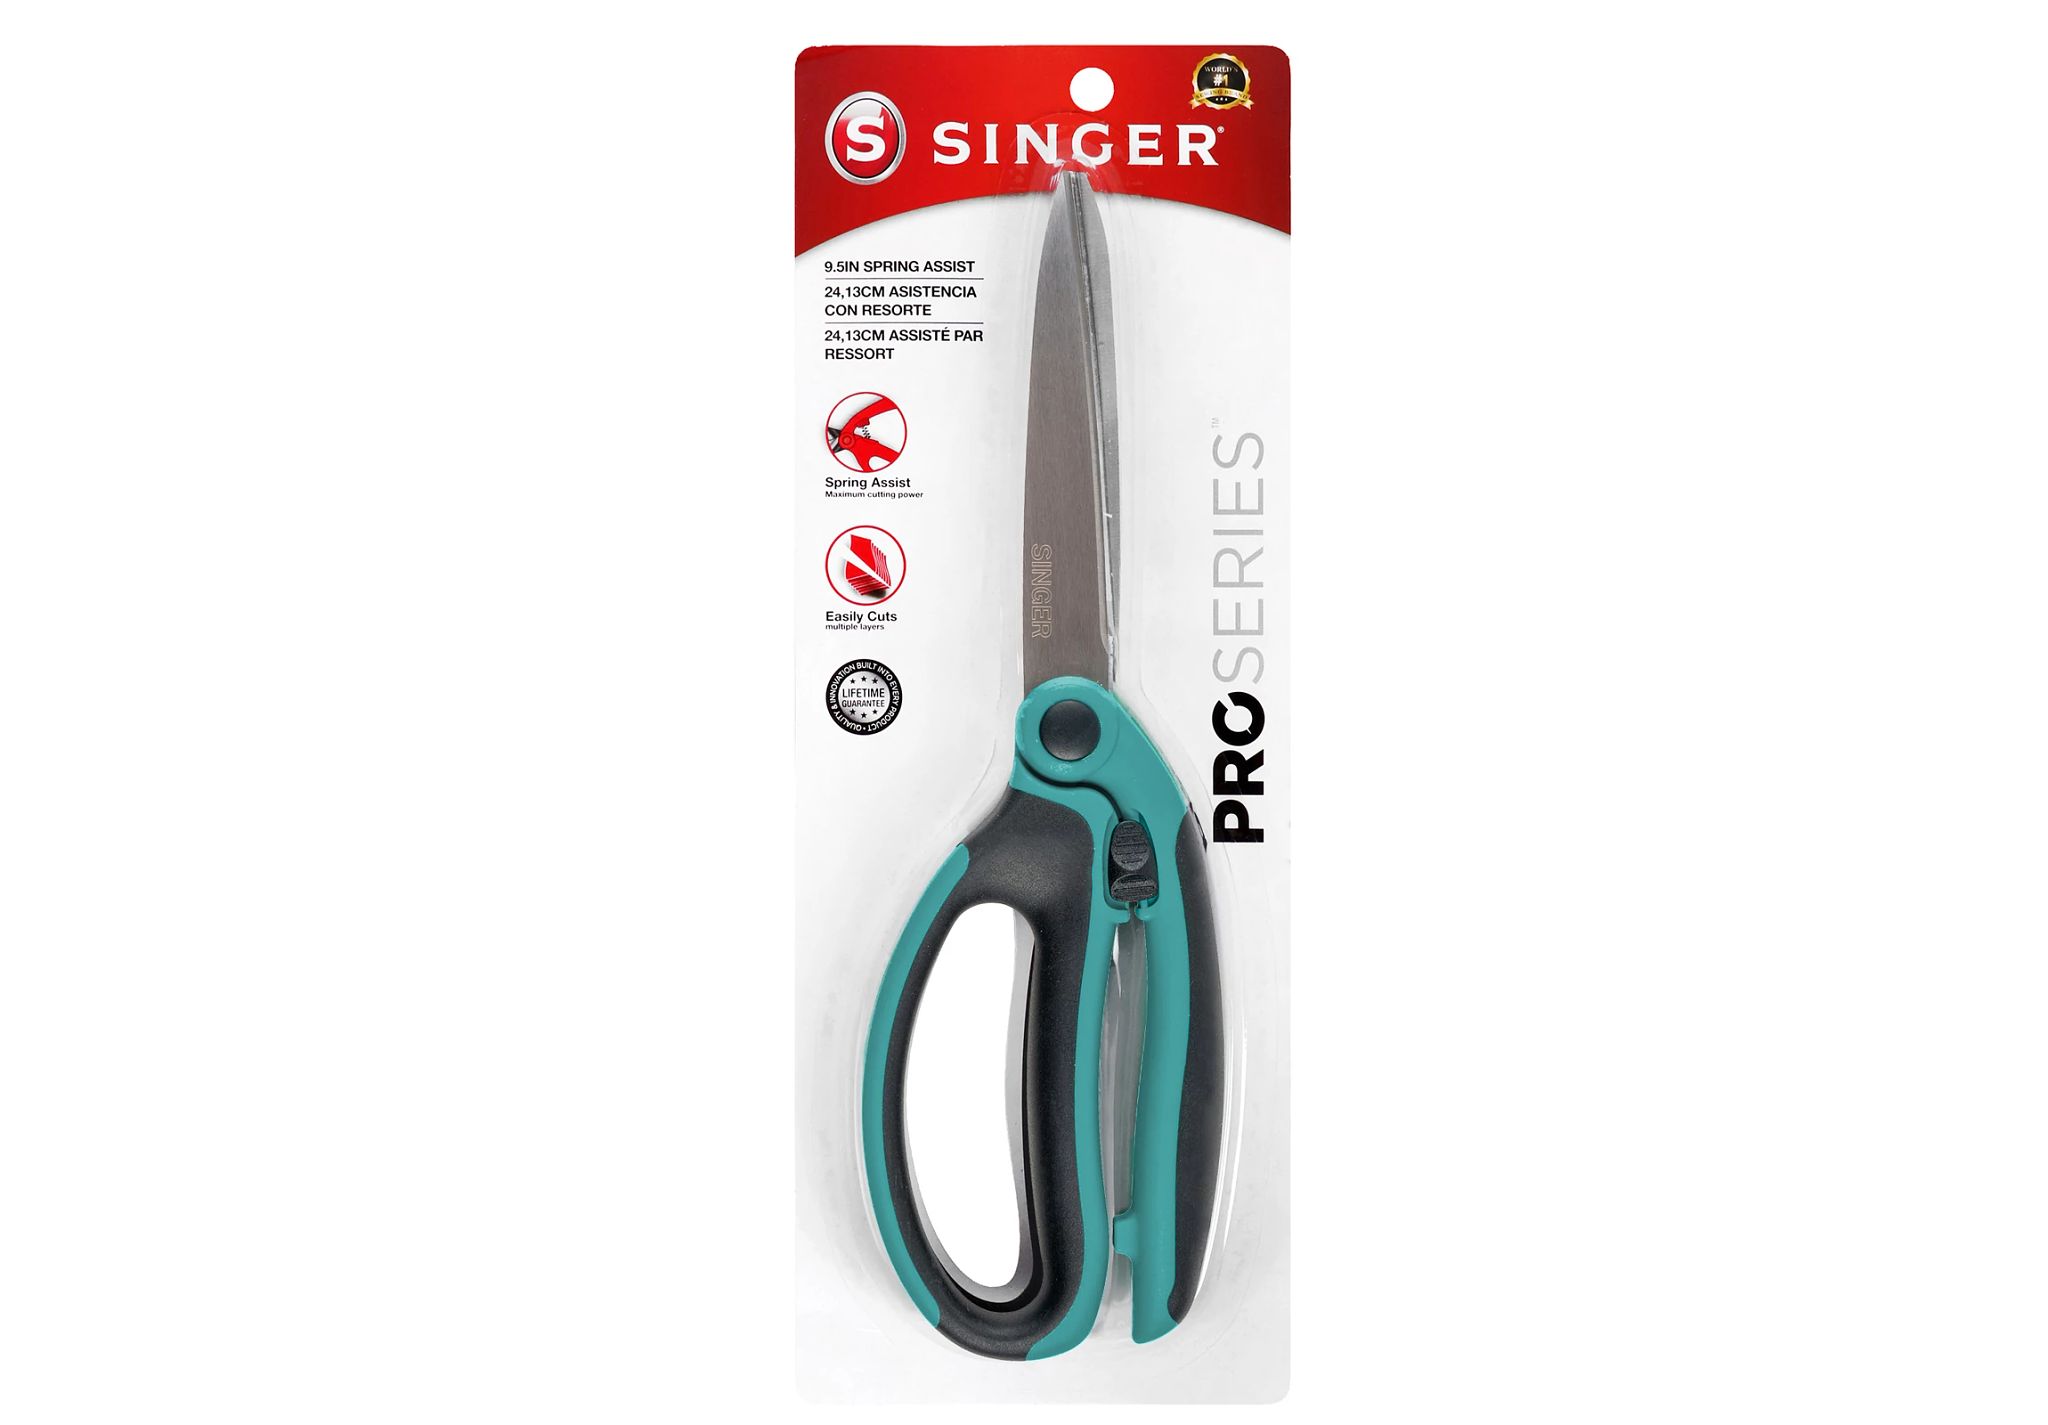  SINGER Fabric Scissors with Comfort Grip, 1-pack, Red